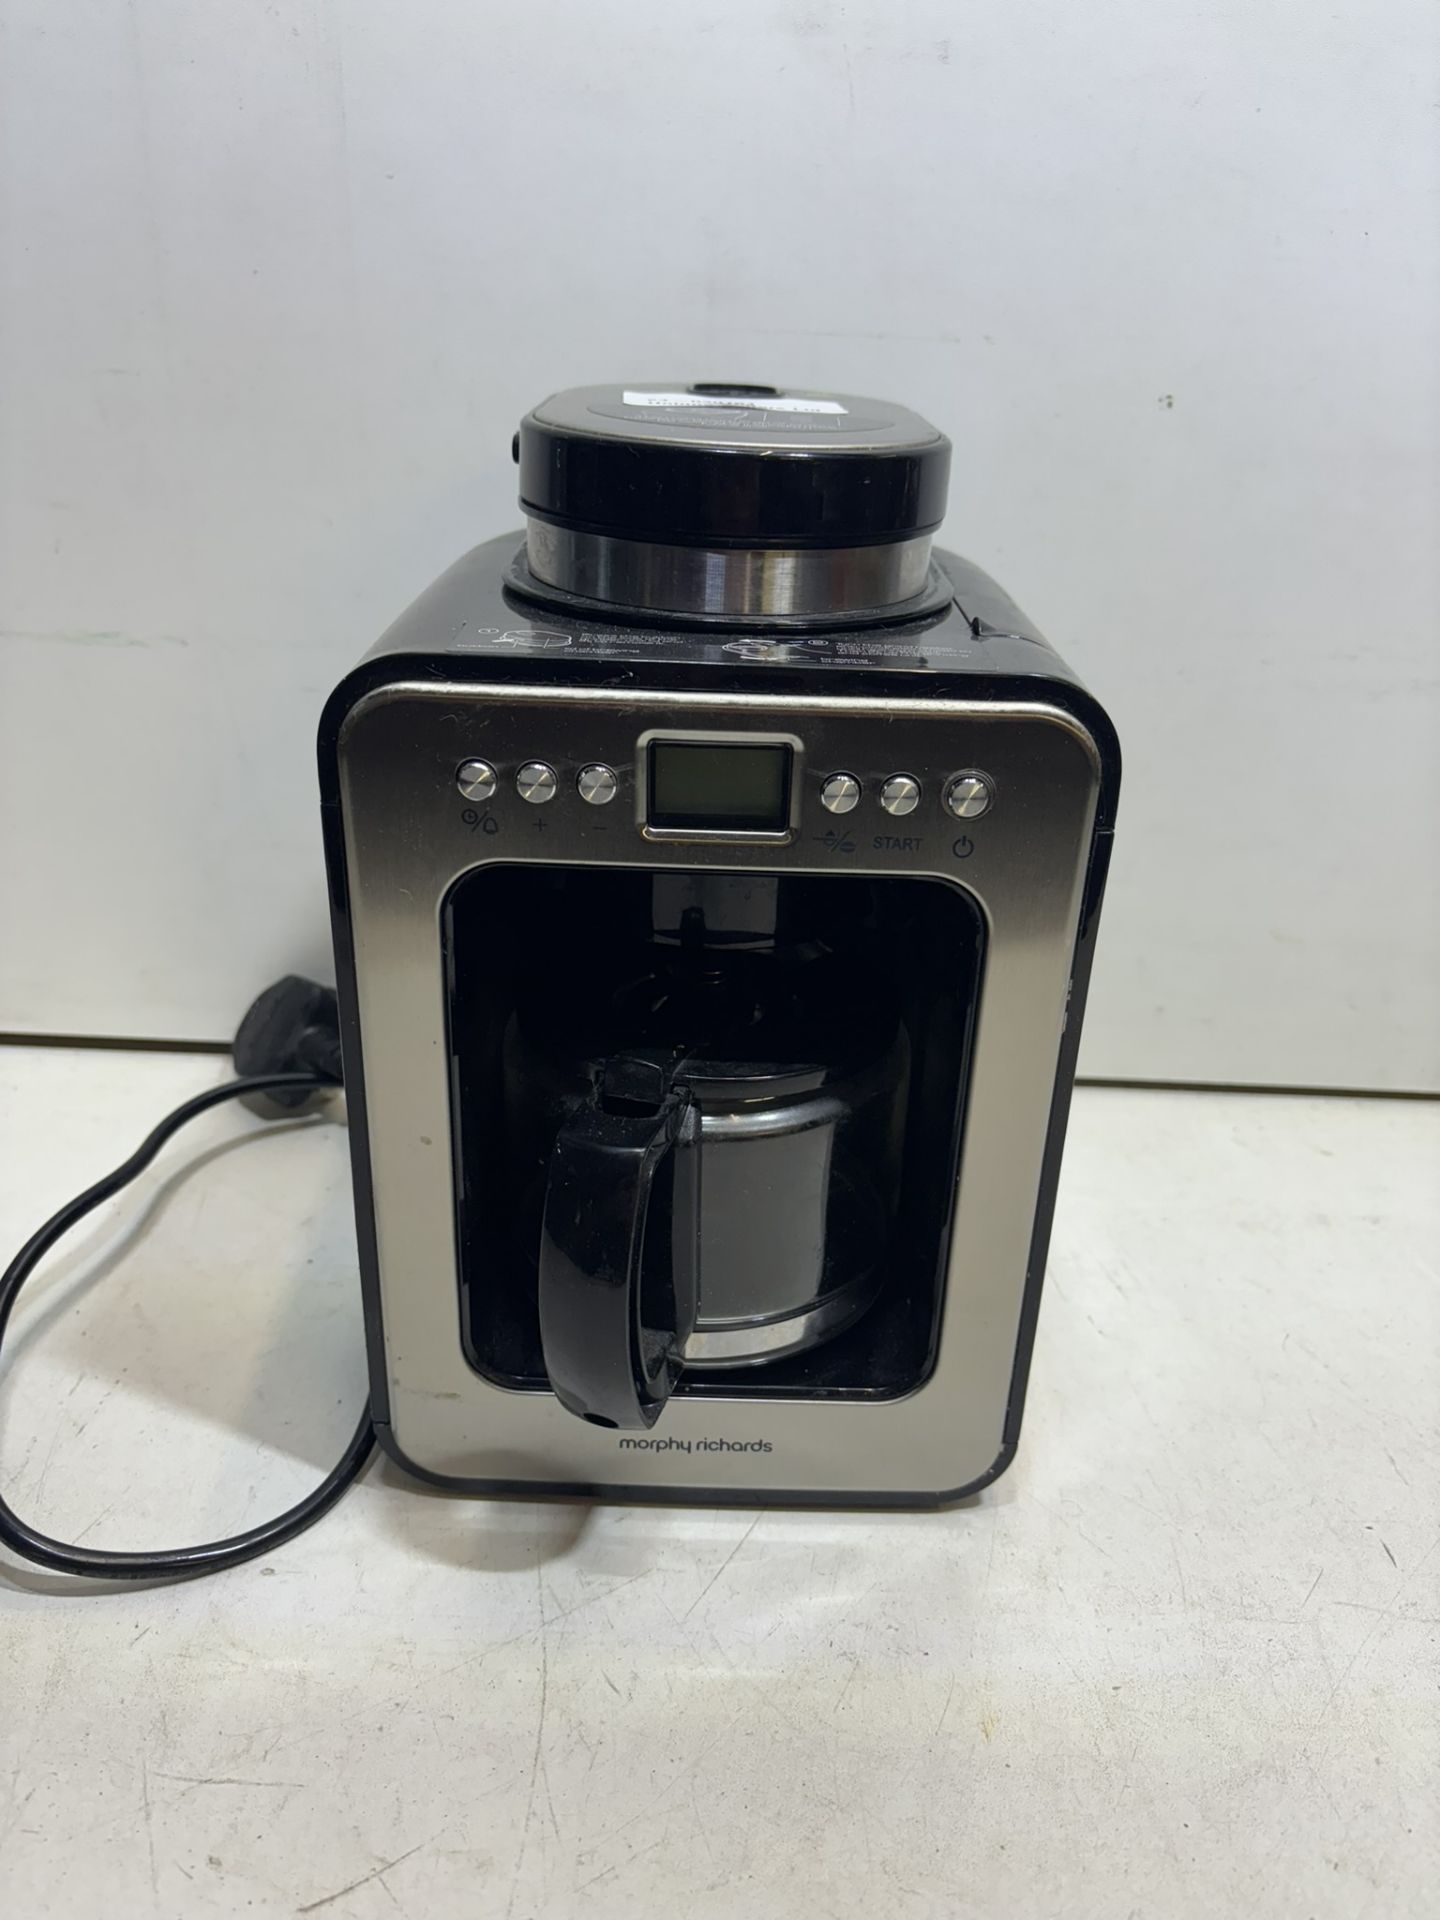 Morphy Richards 162100 Coffee Machine With Russell Hobbs Kettle And Coffee Beans - Bild 2 aus 7